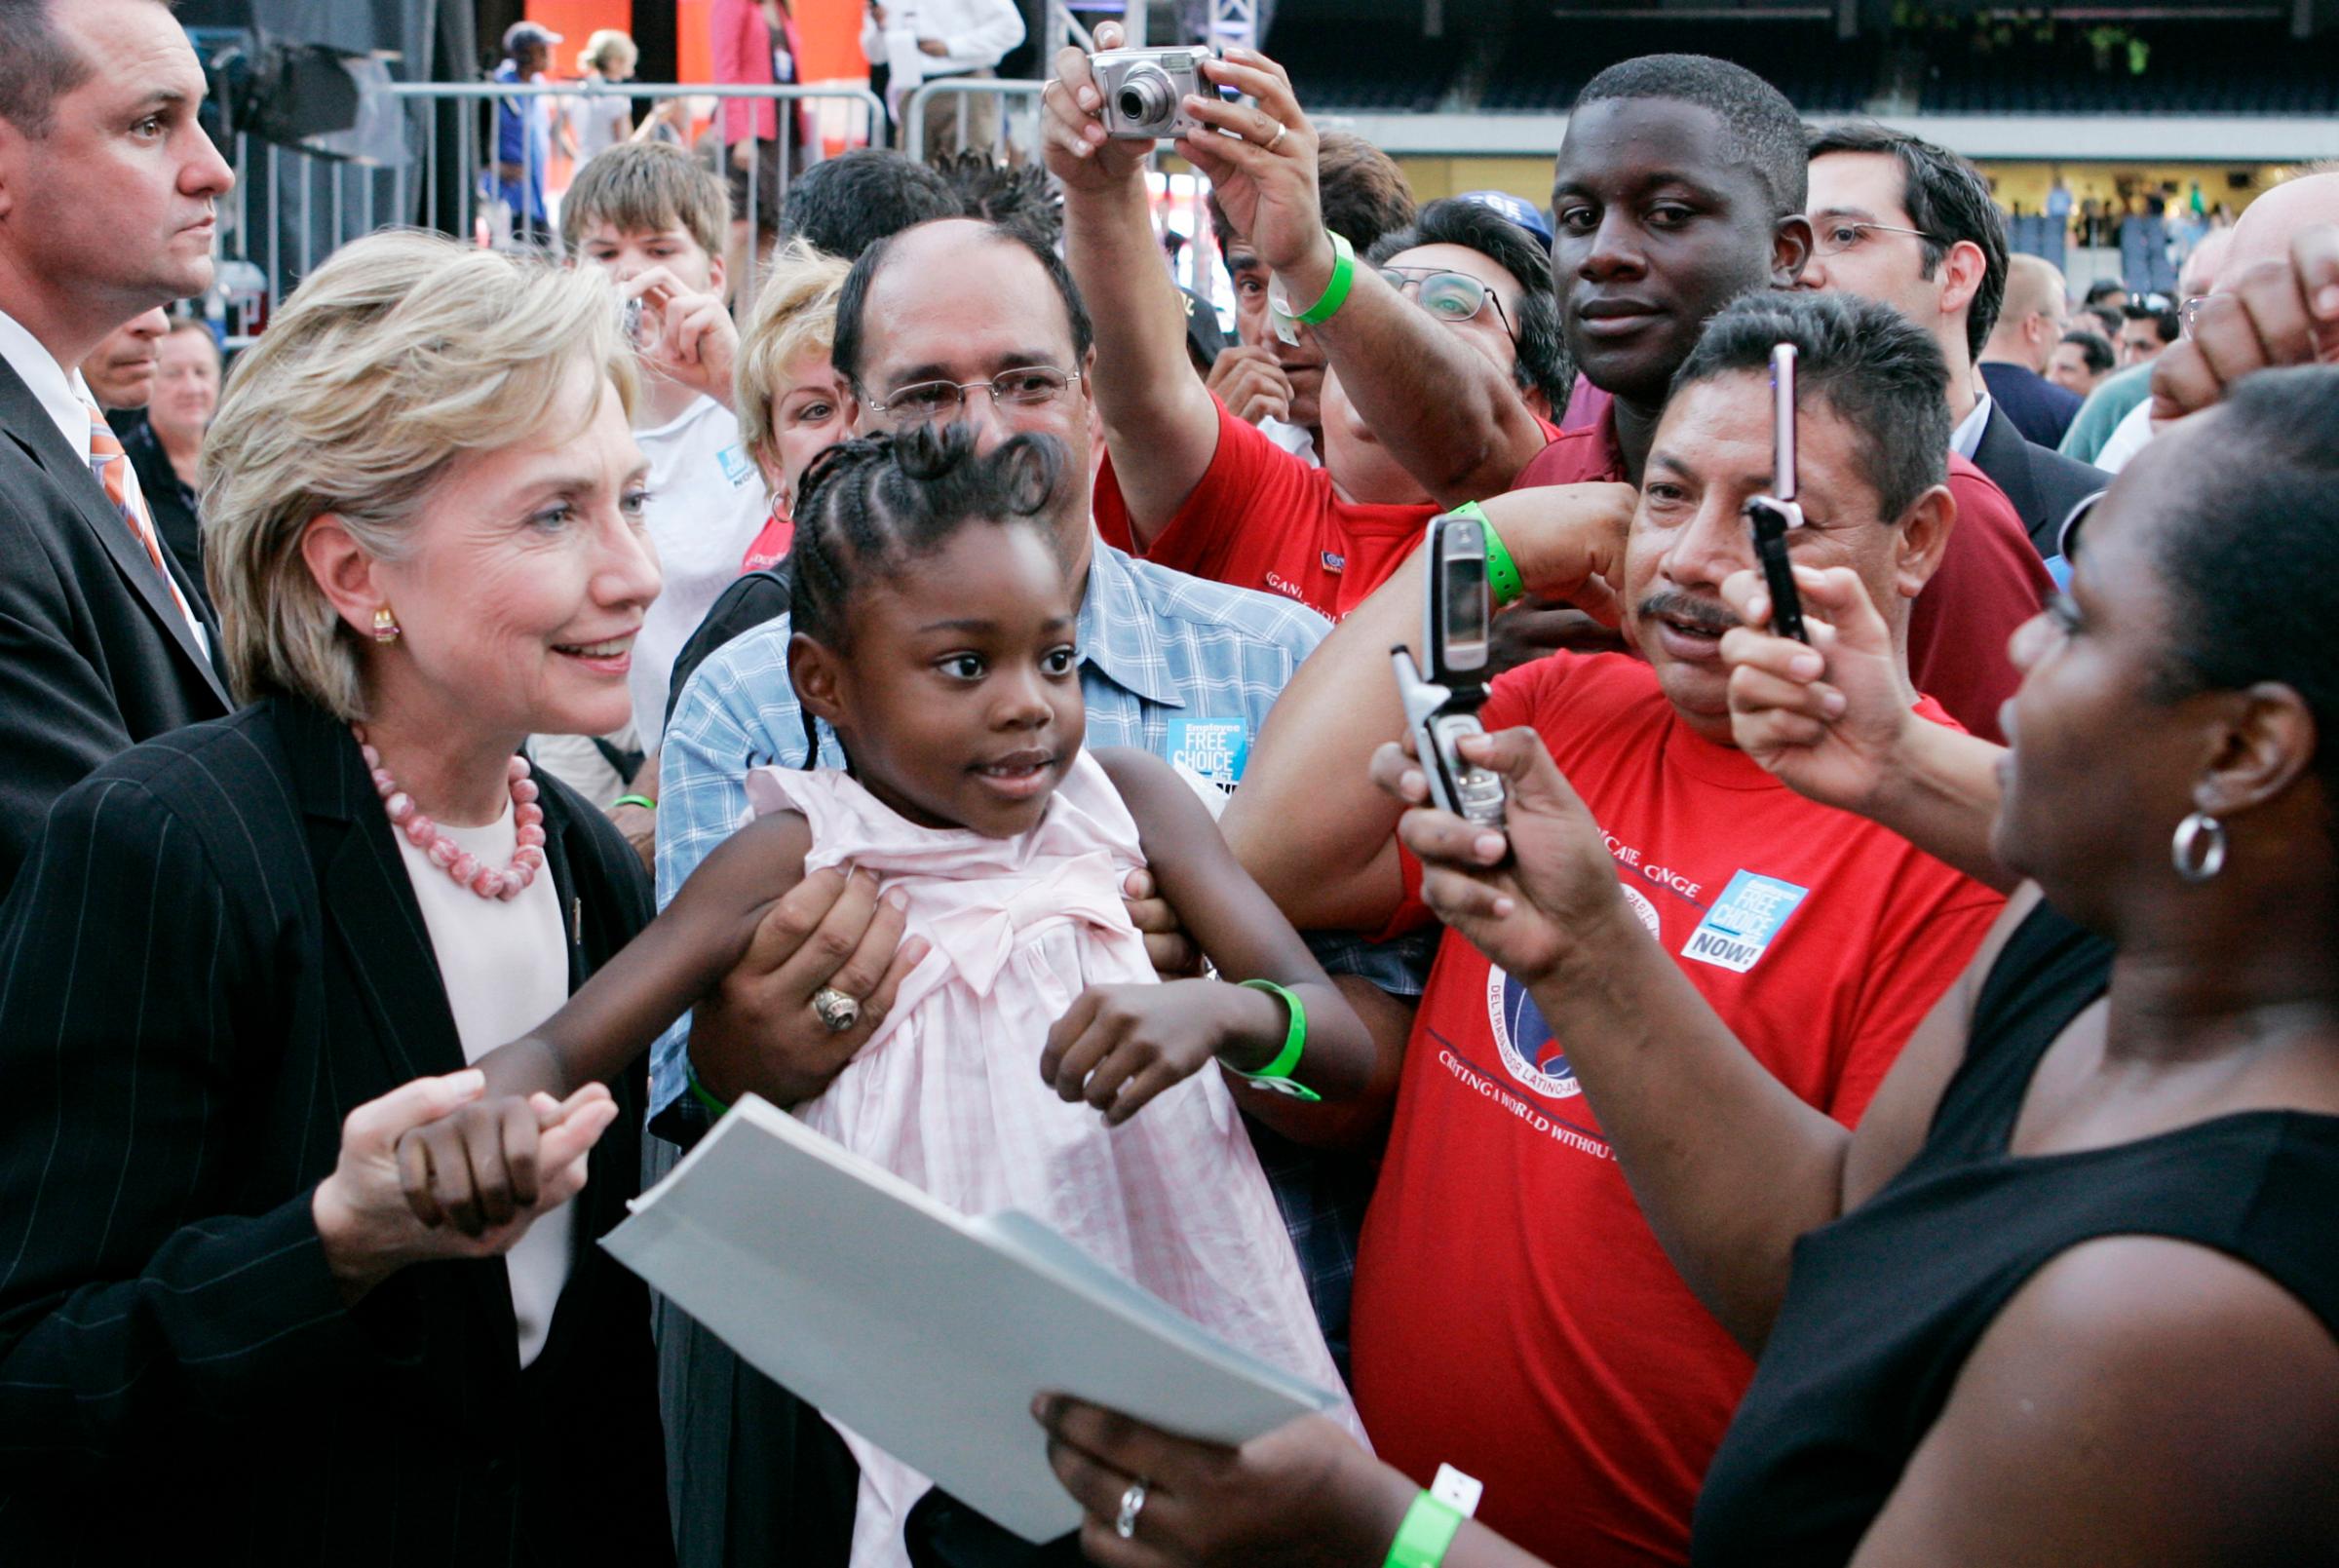 Hillary Clinton poses with a young girl after a presidential forum hosted by the AFL-CIO at Soldier Field in Chicago, on Aug. 7, 2007.